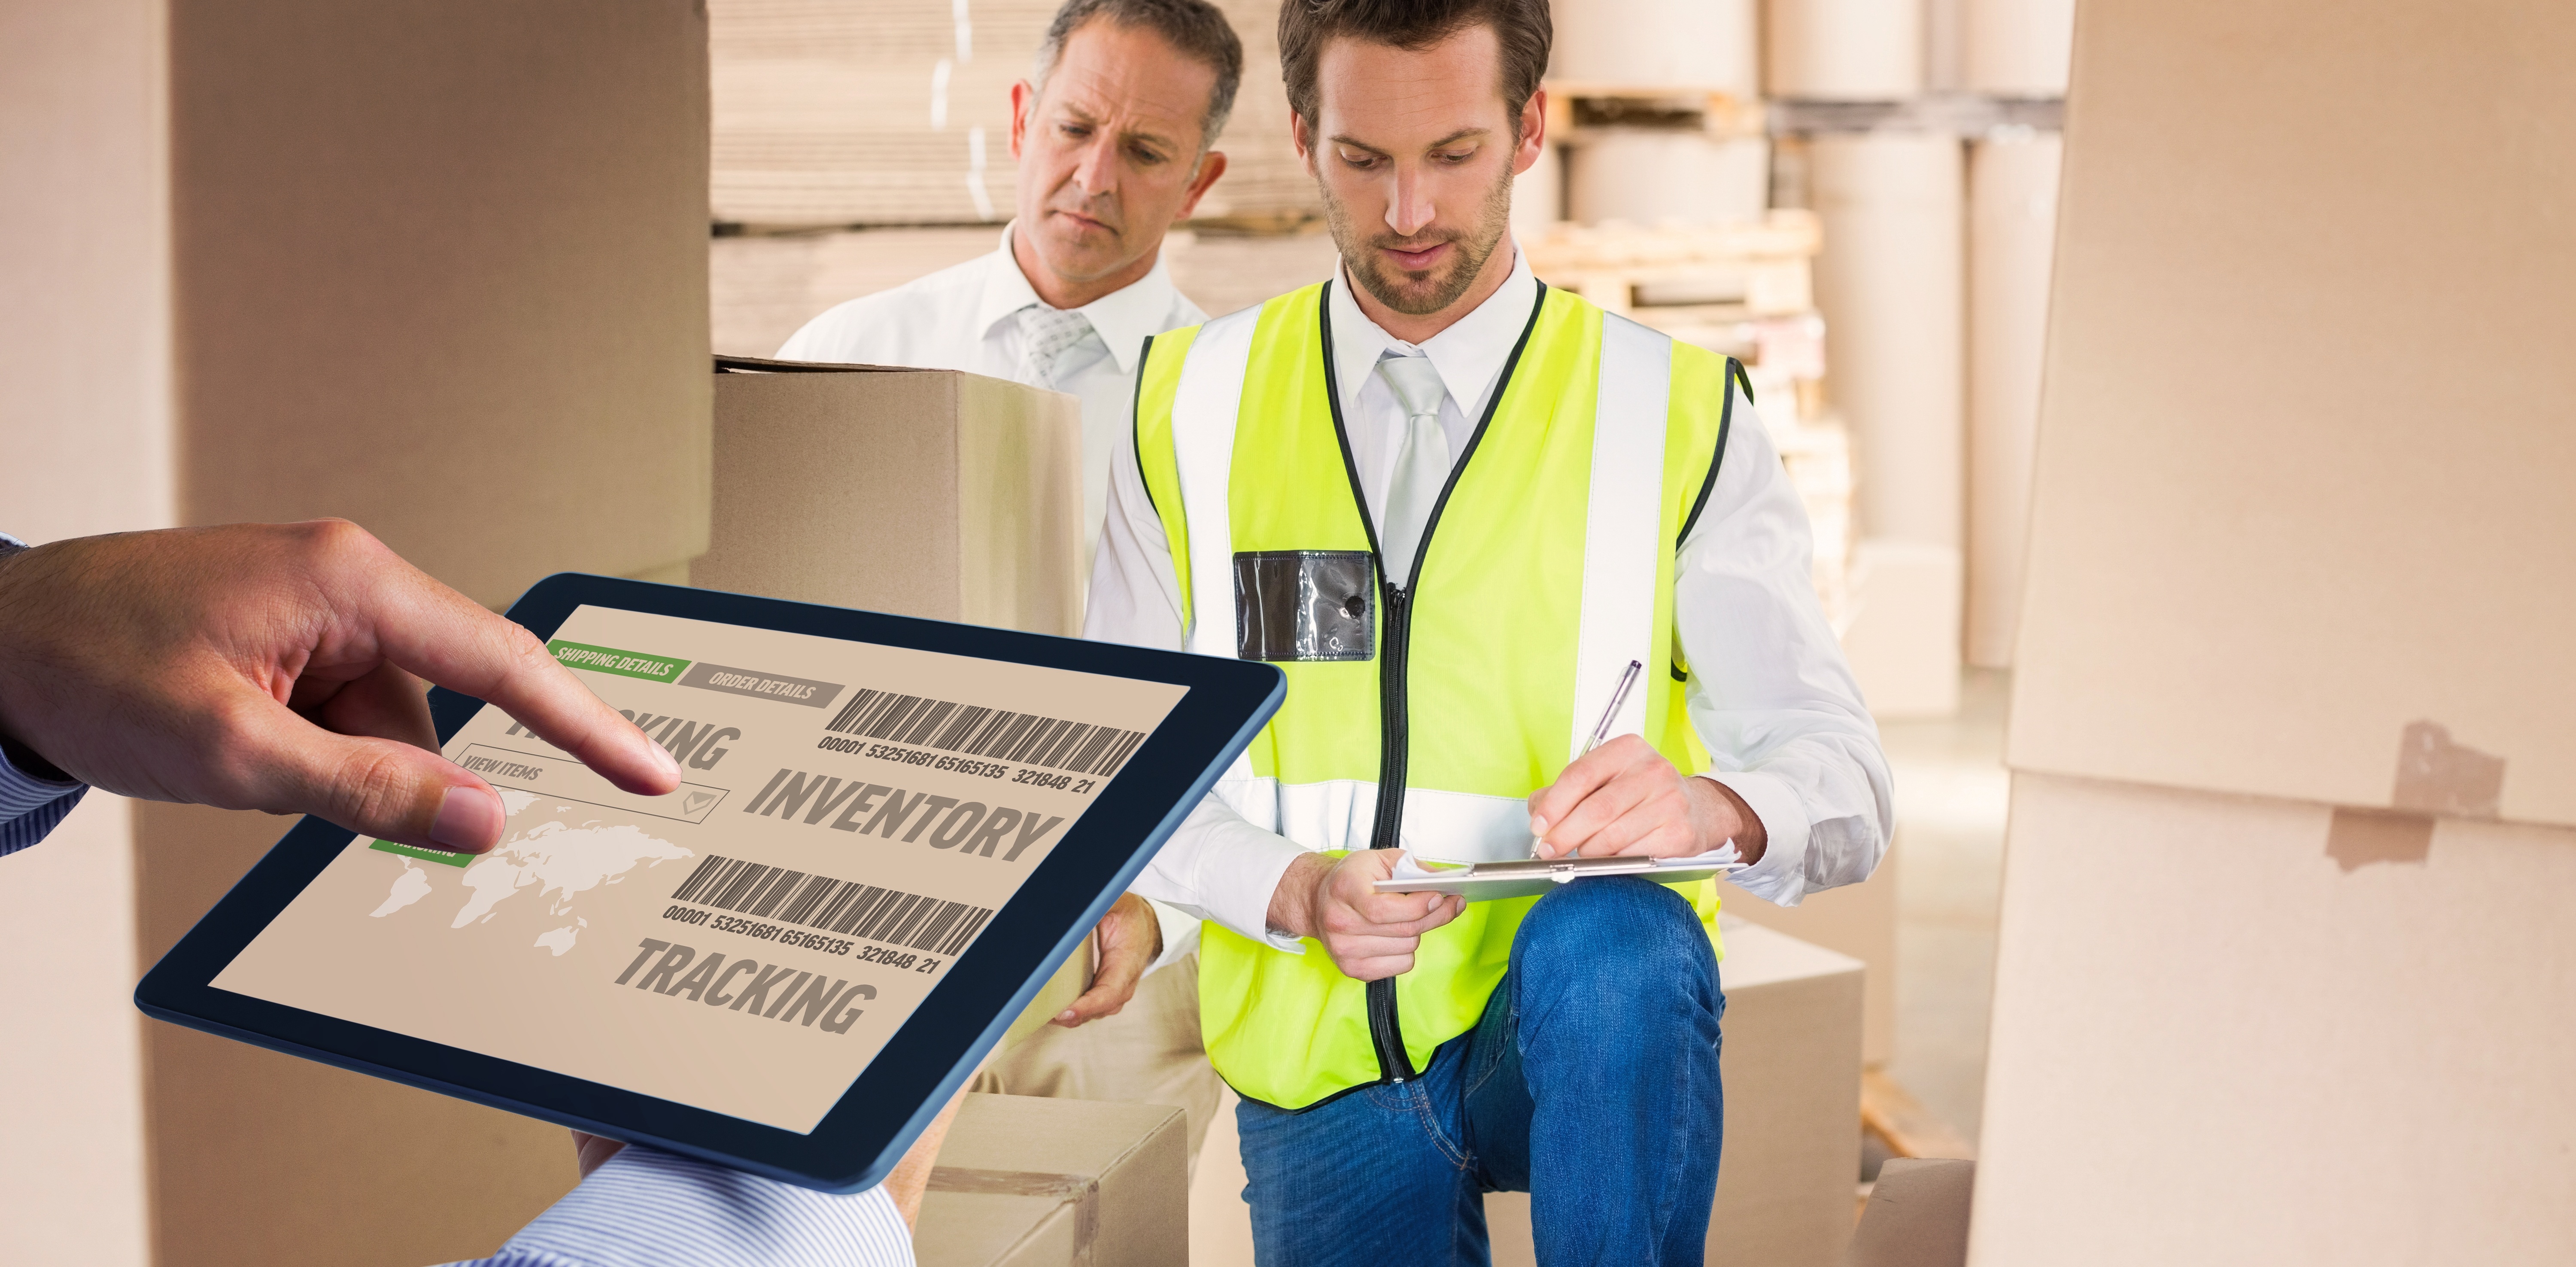 Real Time Inventory Visibility: Why It Matters And Why You Need It